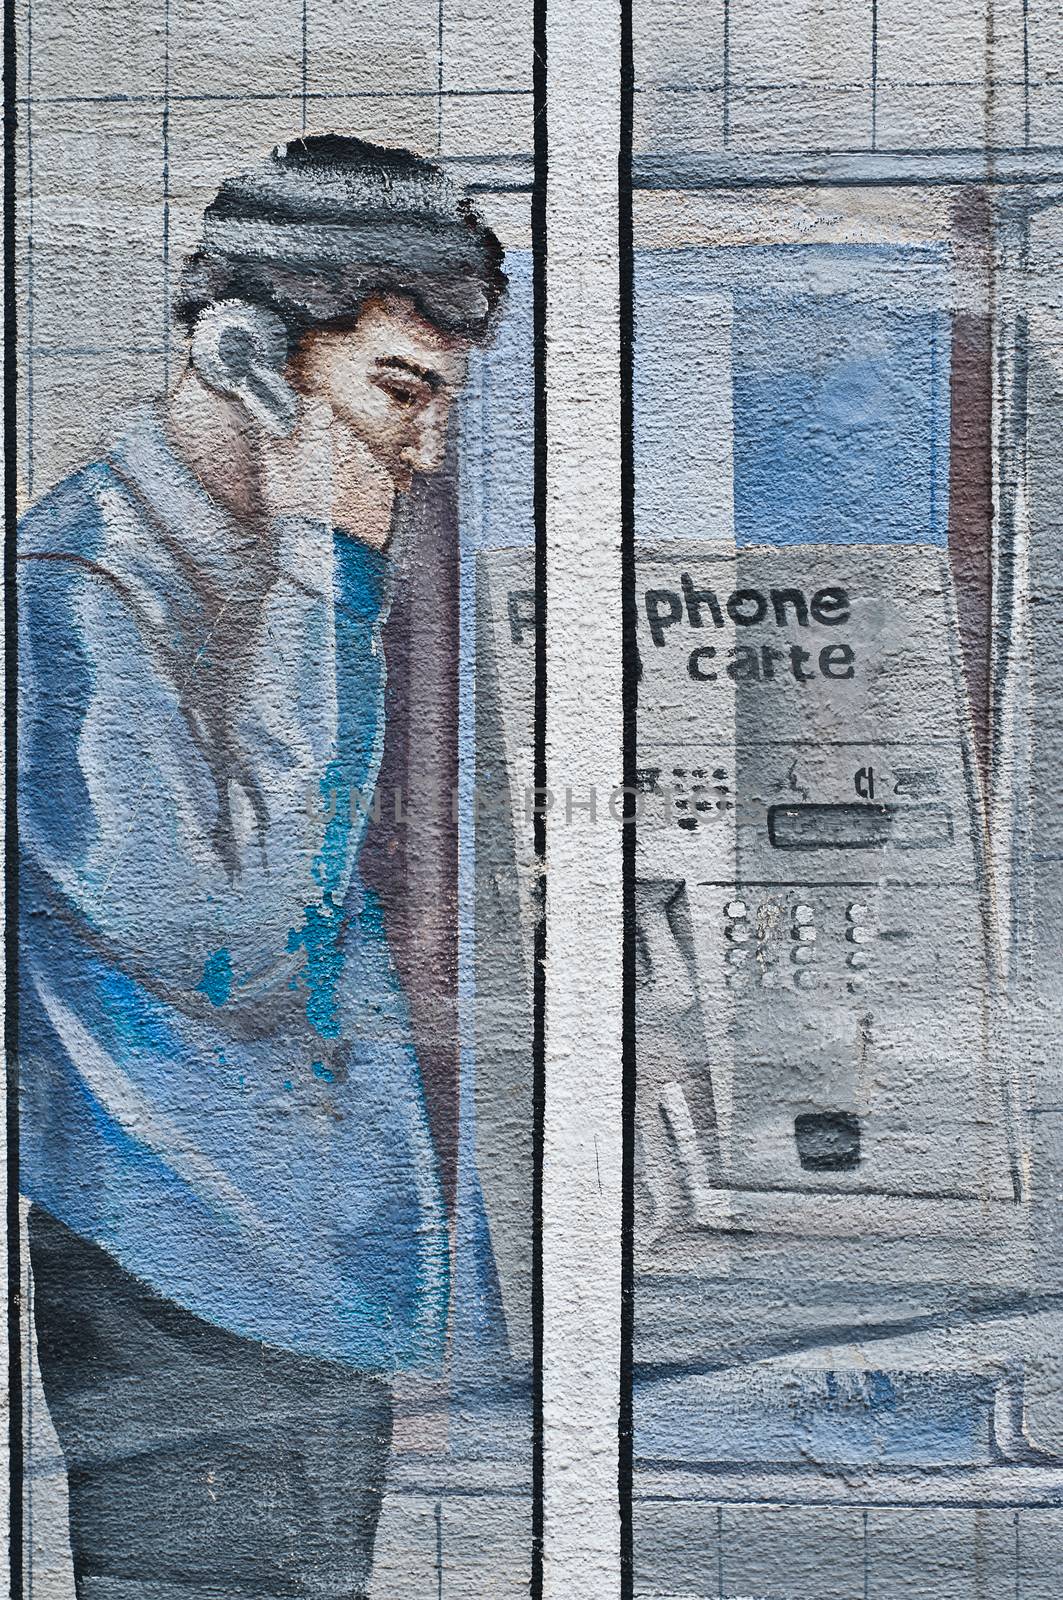 Urban Art - street in Mulhouse - man in a phone cab by NeydtStock